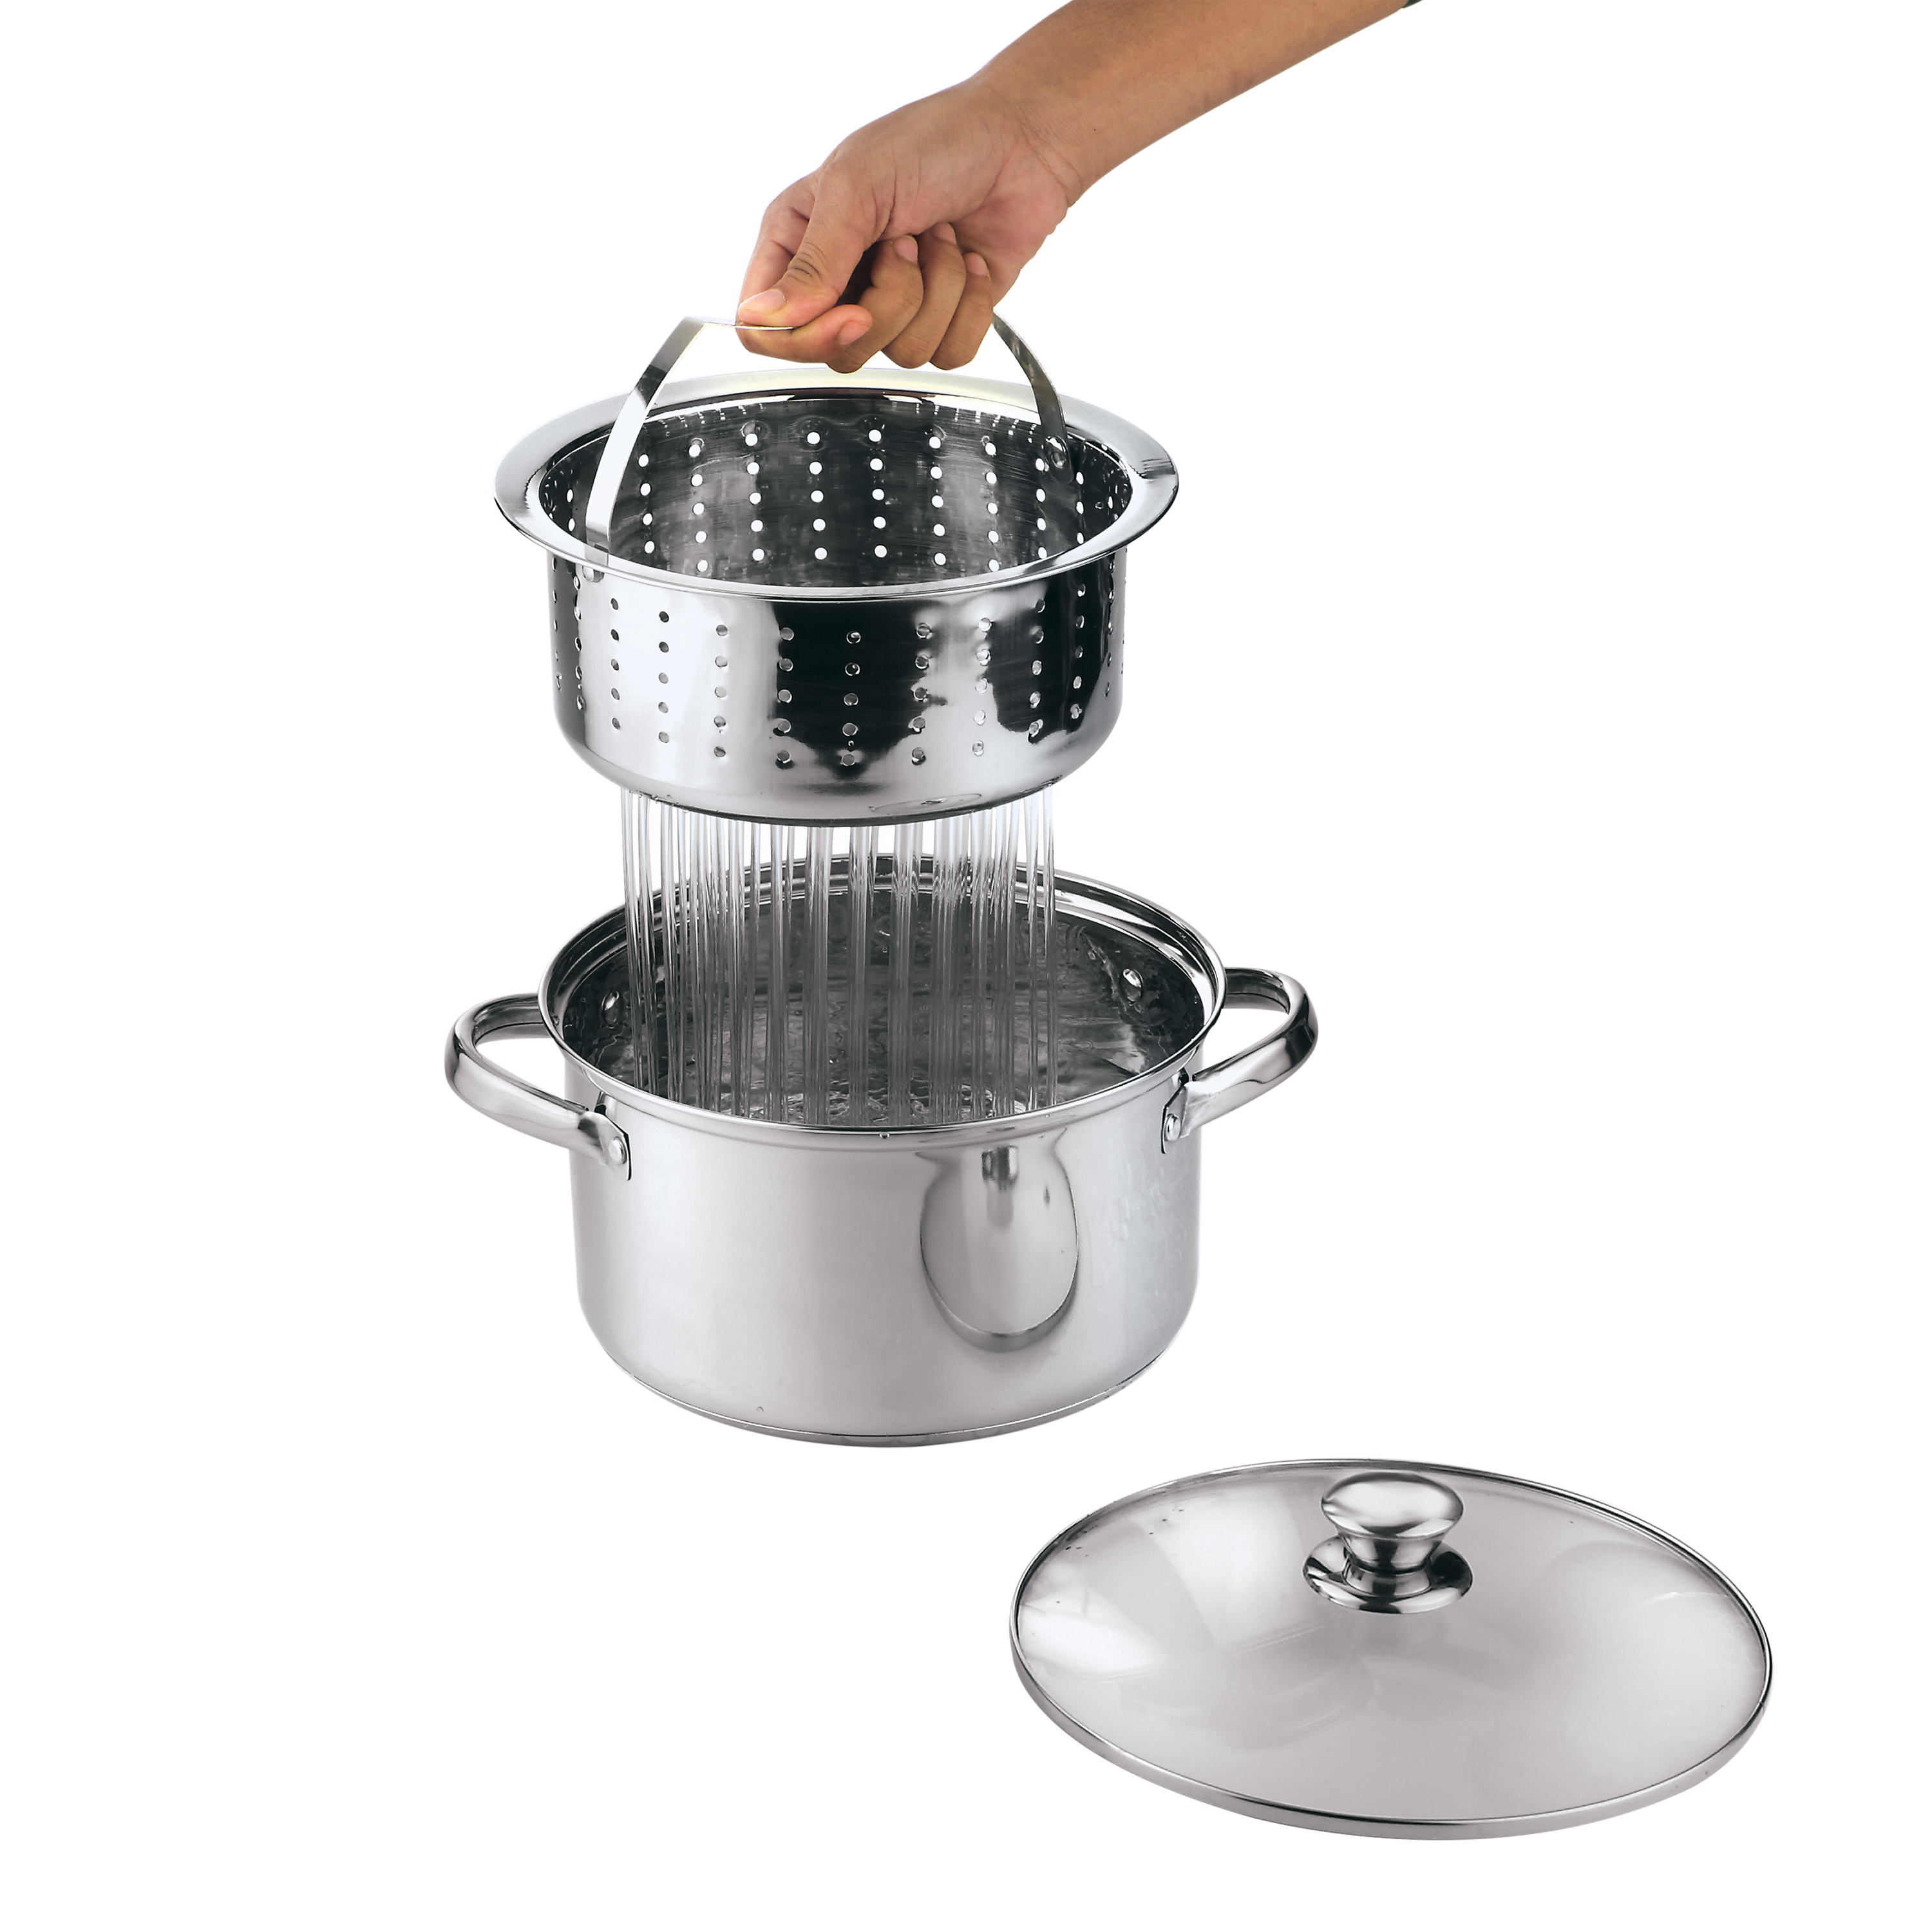 Mainstays Stainless Steel 4 Quart Steamer Pot with Steamer Insert and Lid - image 5 of 6